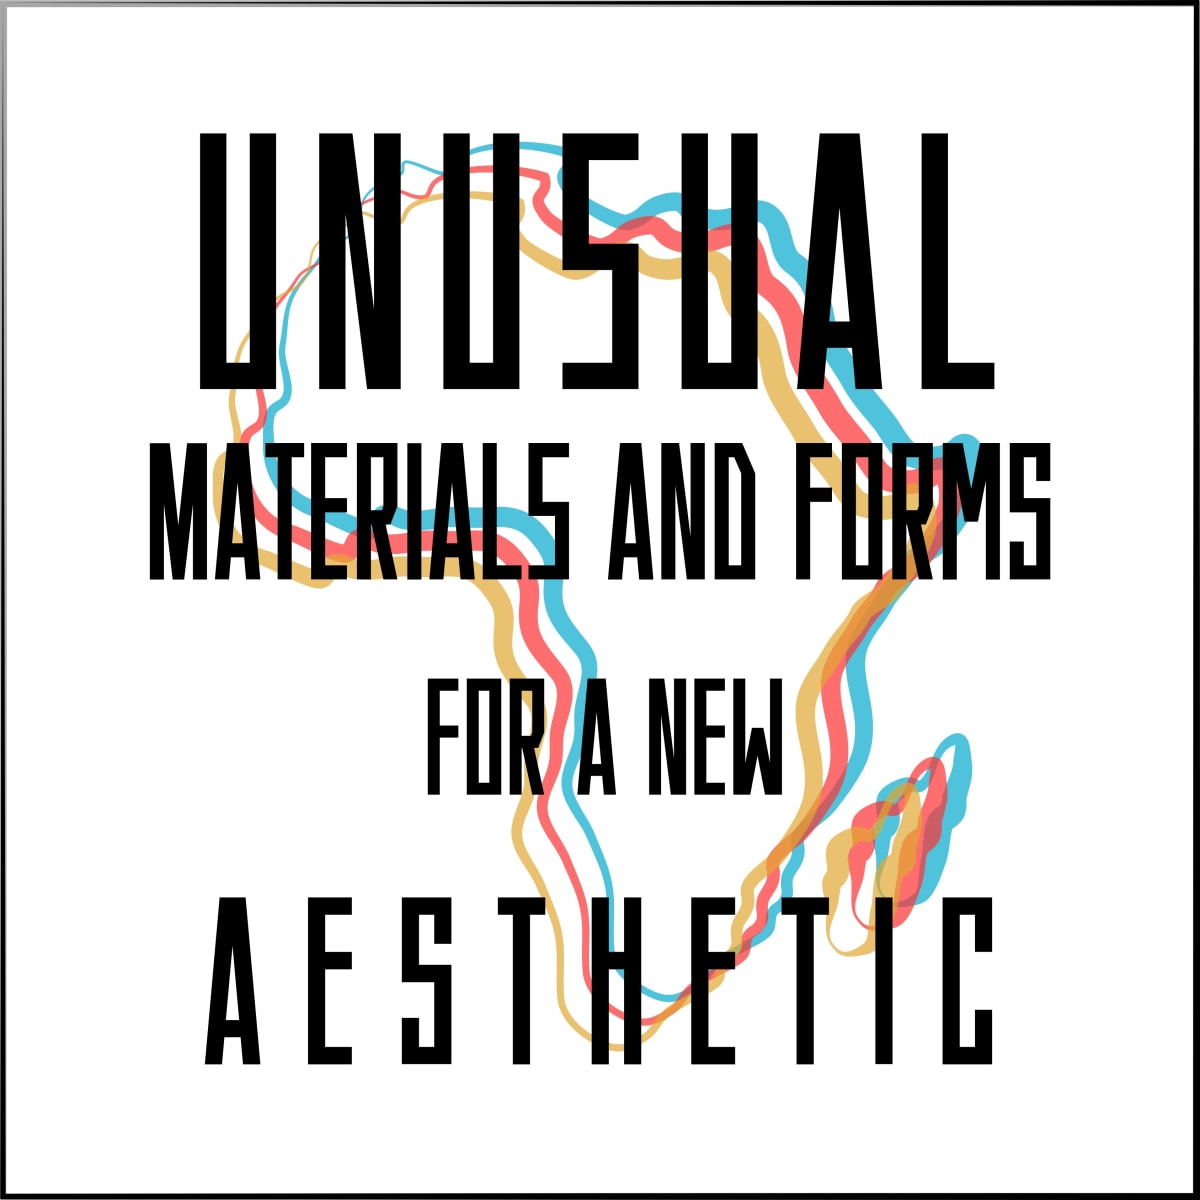 Unusual materials and forms for a new aesthetic